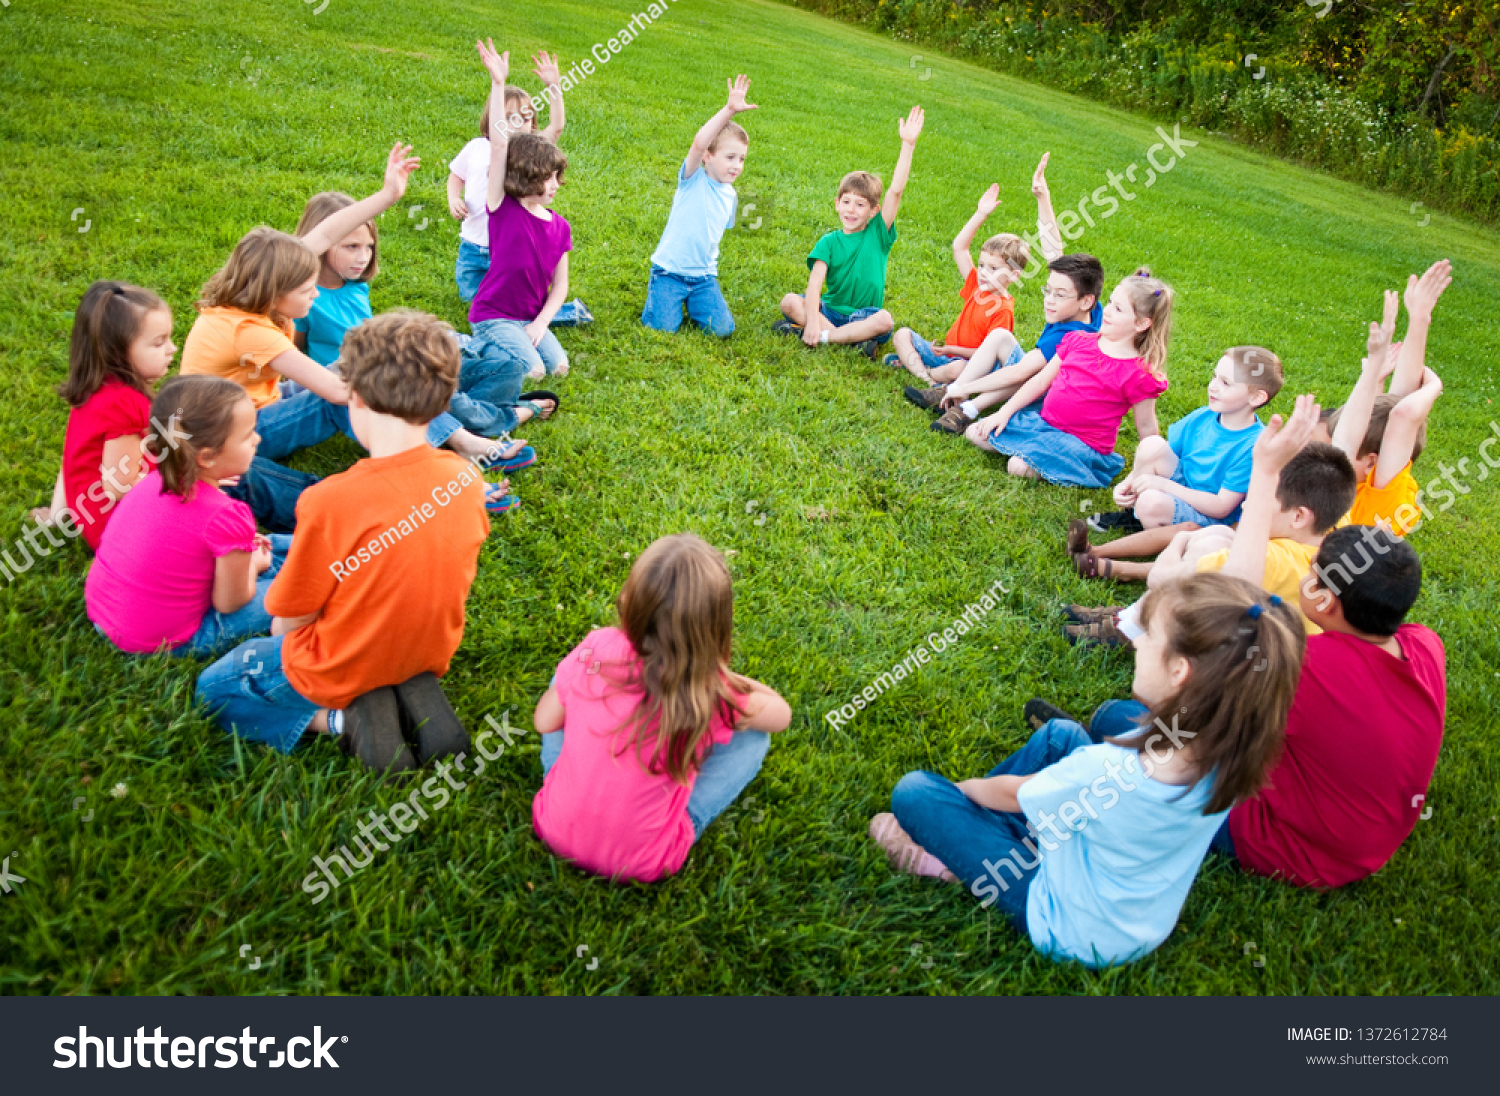 Group of Kids Sitting in a Circle Outside #1372612784